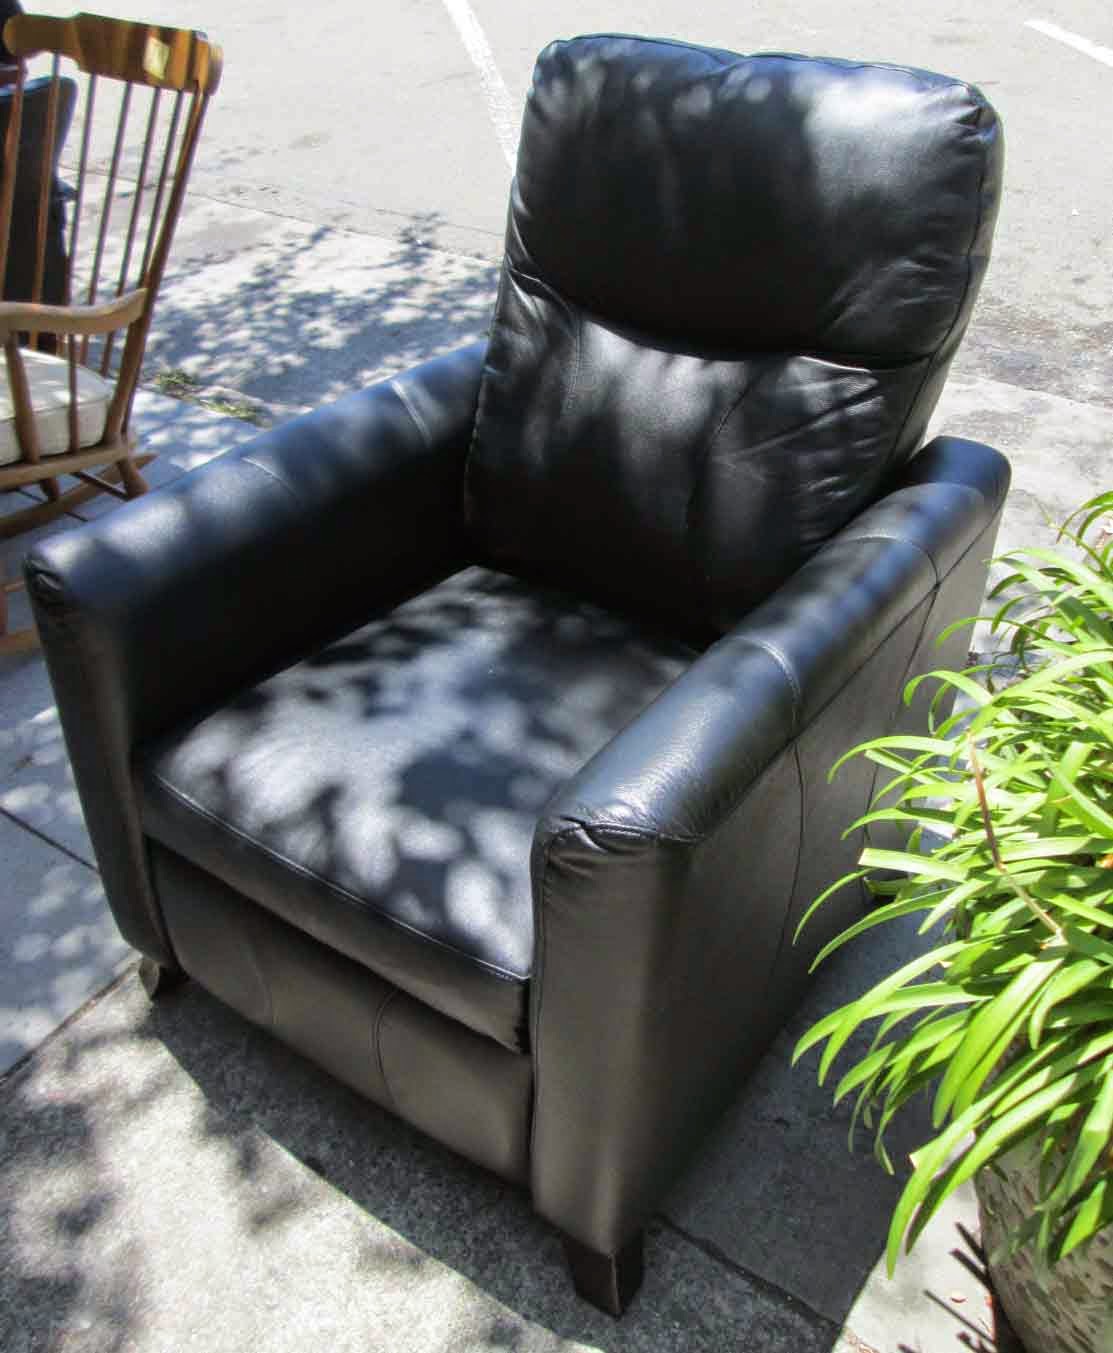 UHURU FURNITURE & COLLECTIBLES: SOLD Slim and Sleek Faux Leather Recliner - $1151113 x 1353